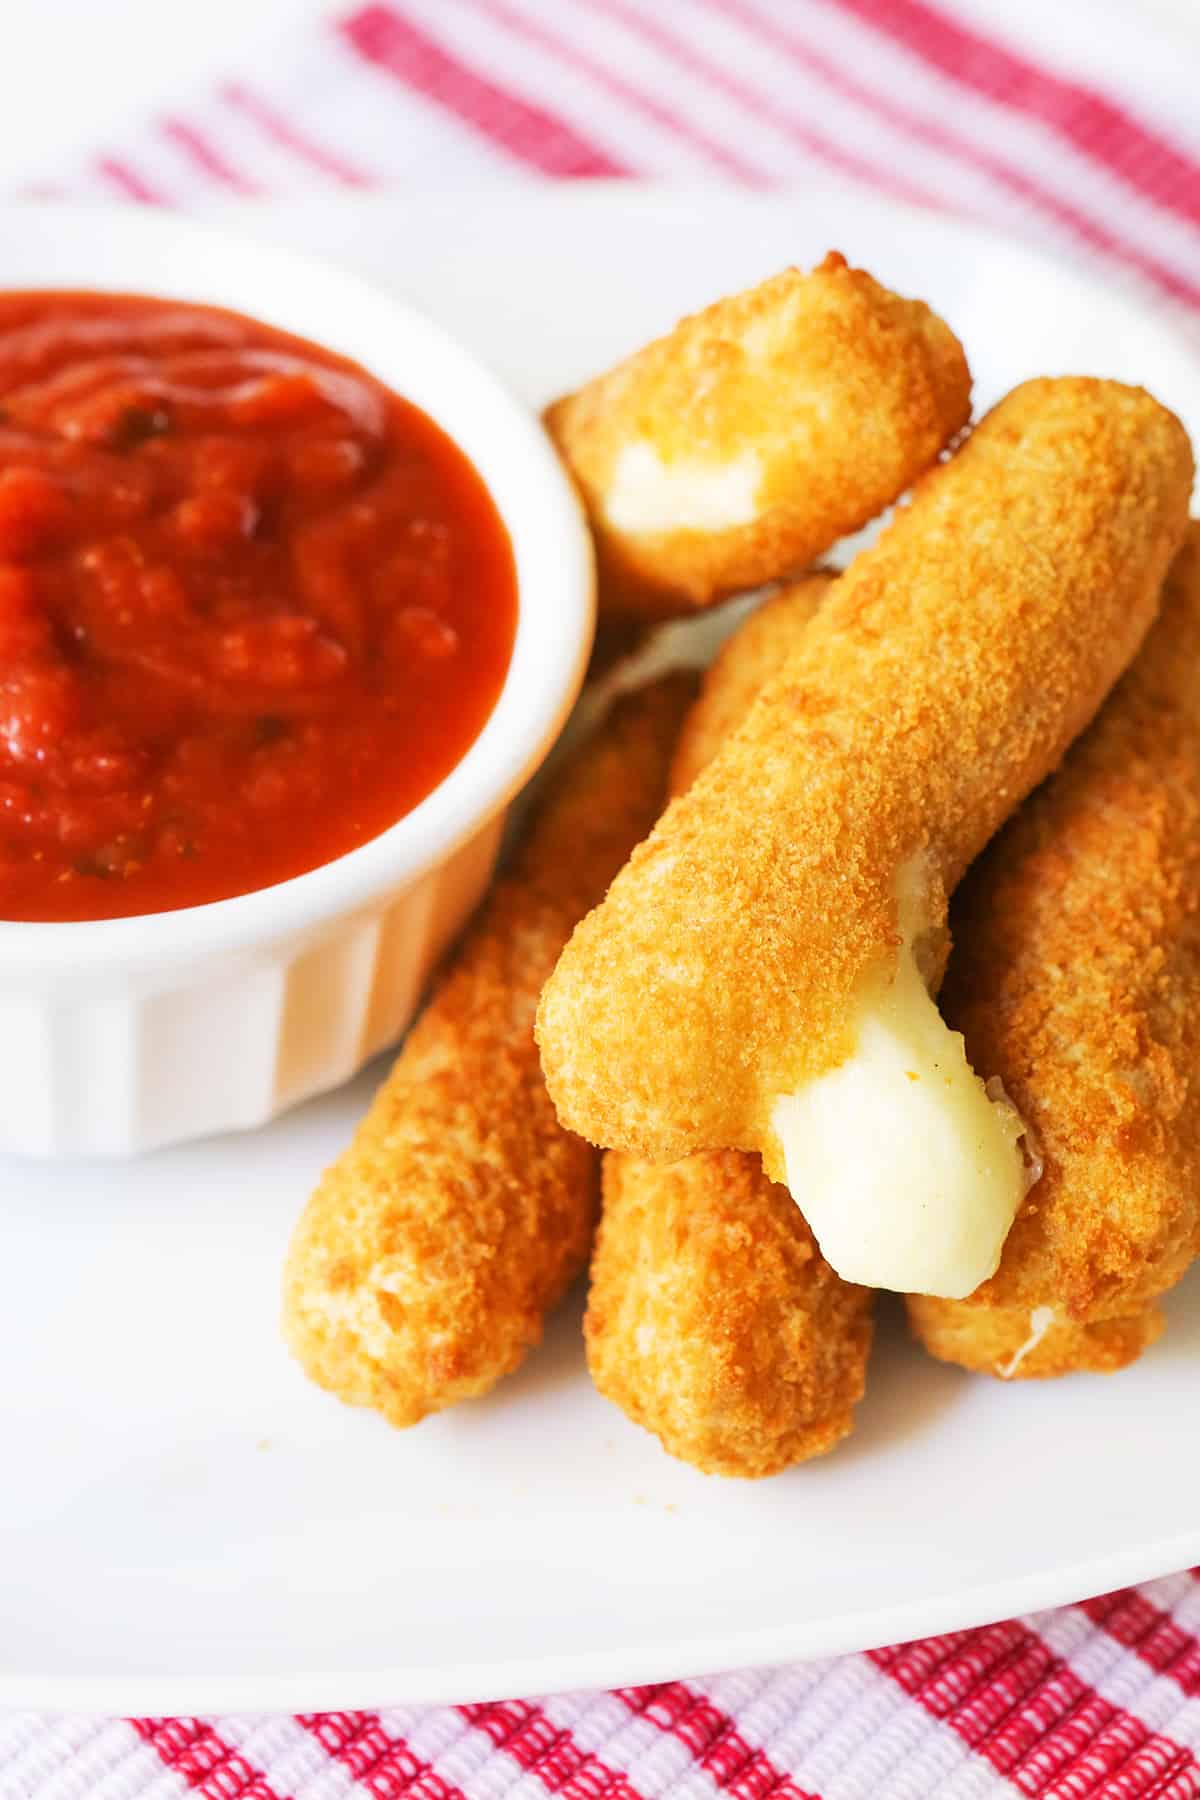 Stacked mozzarella sticks with the top one oozing out cheese.